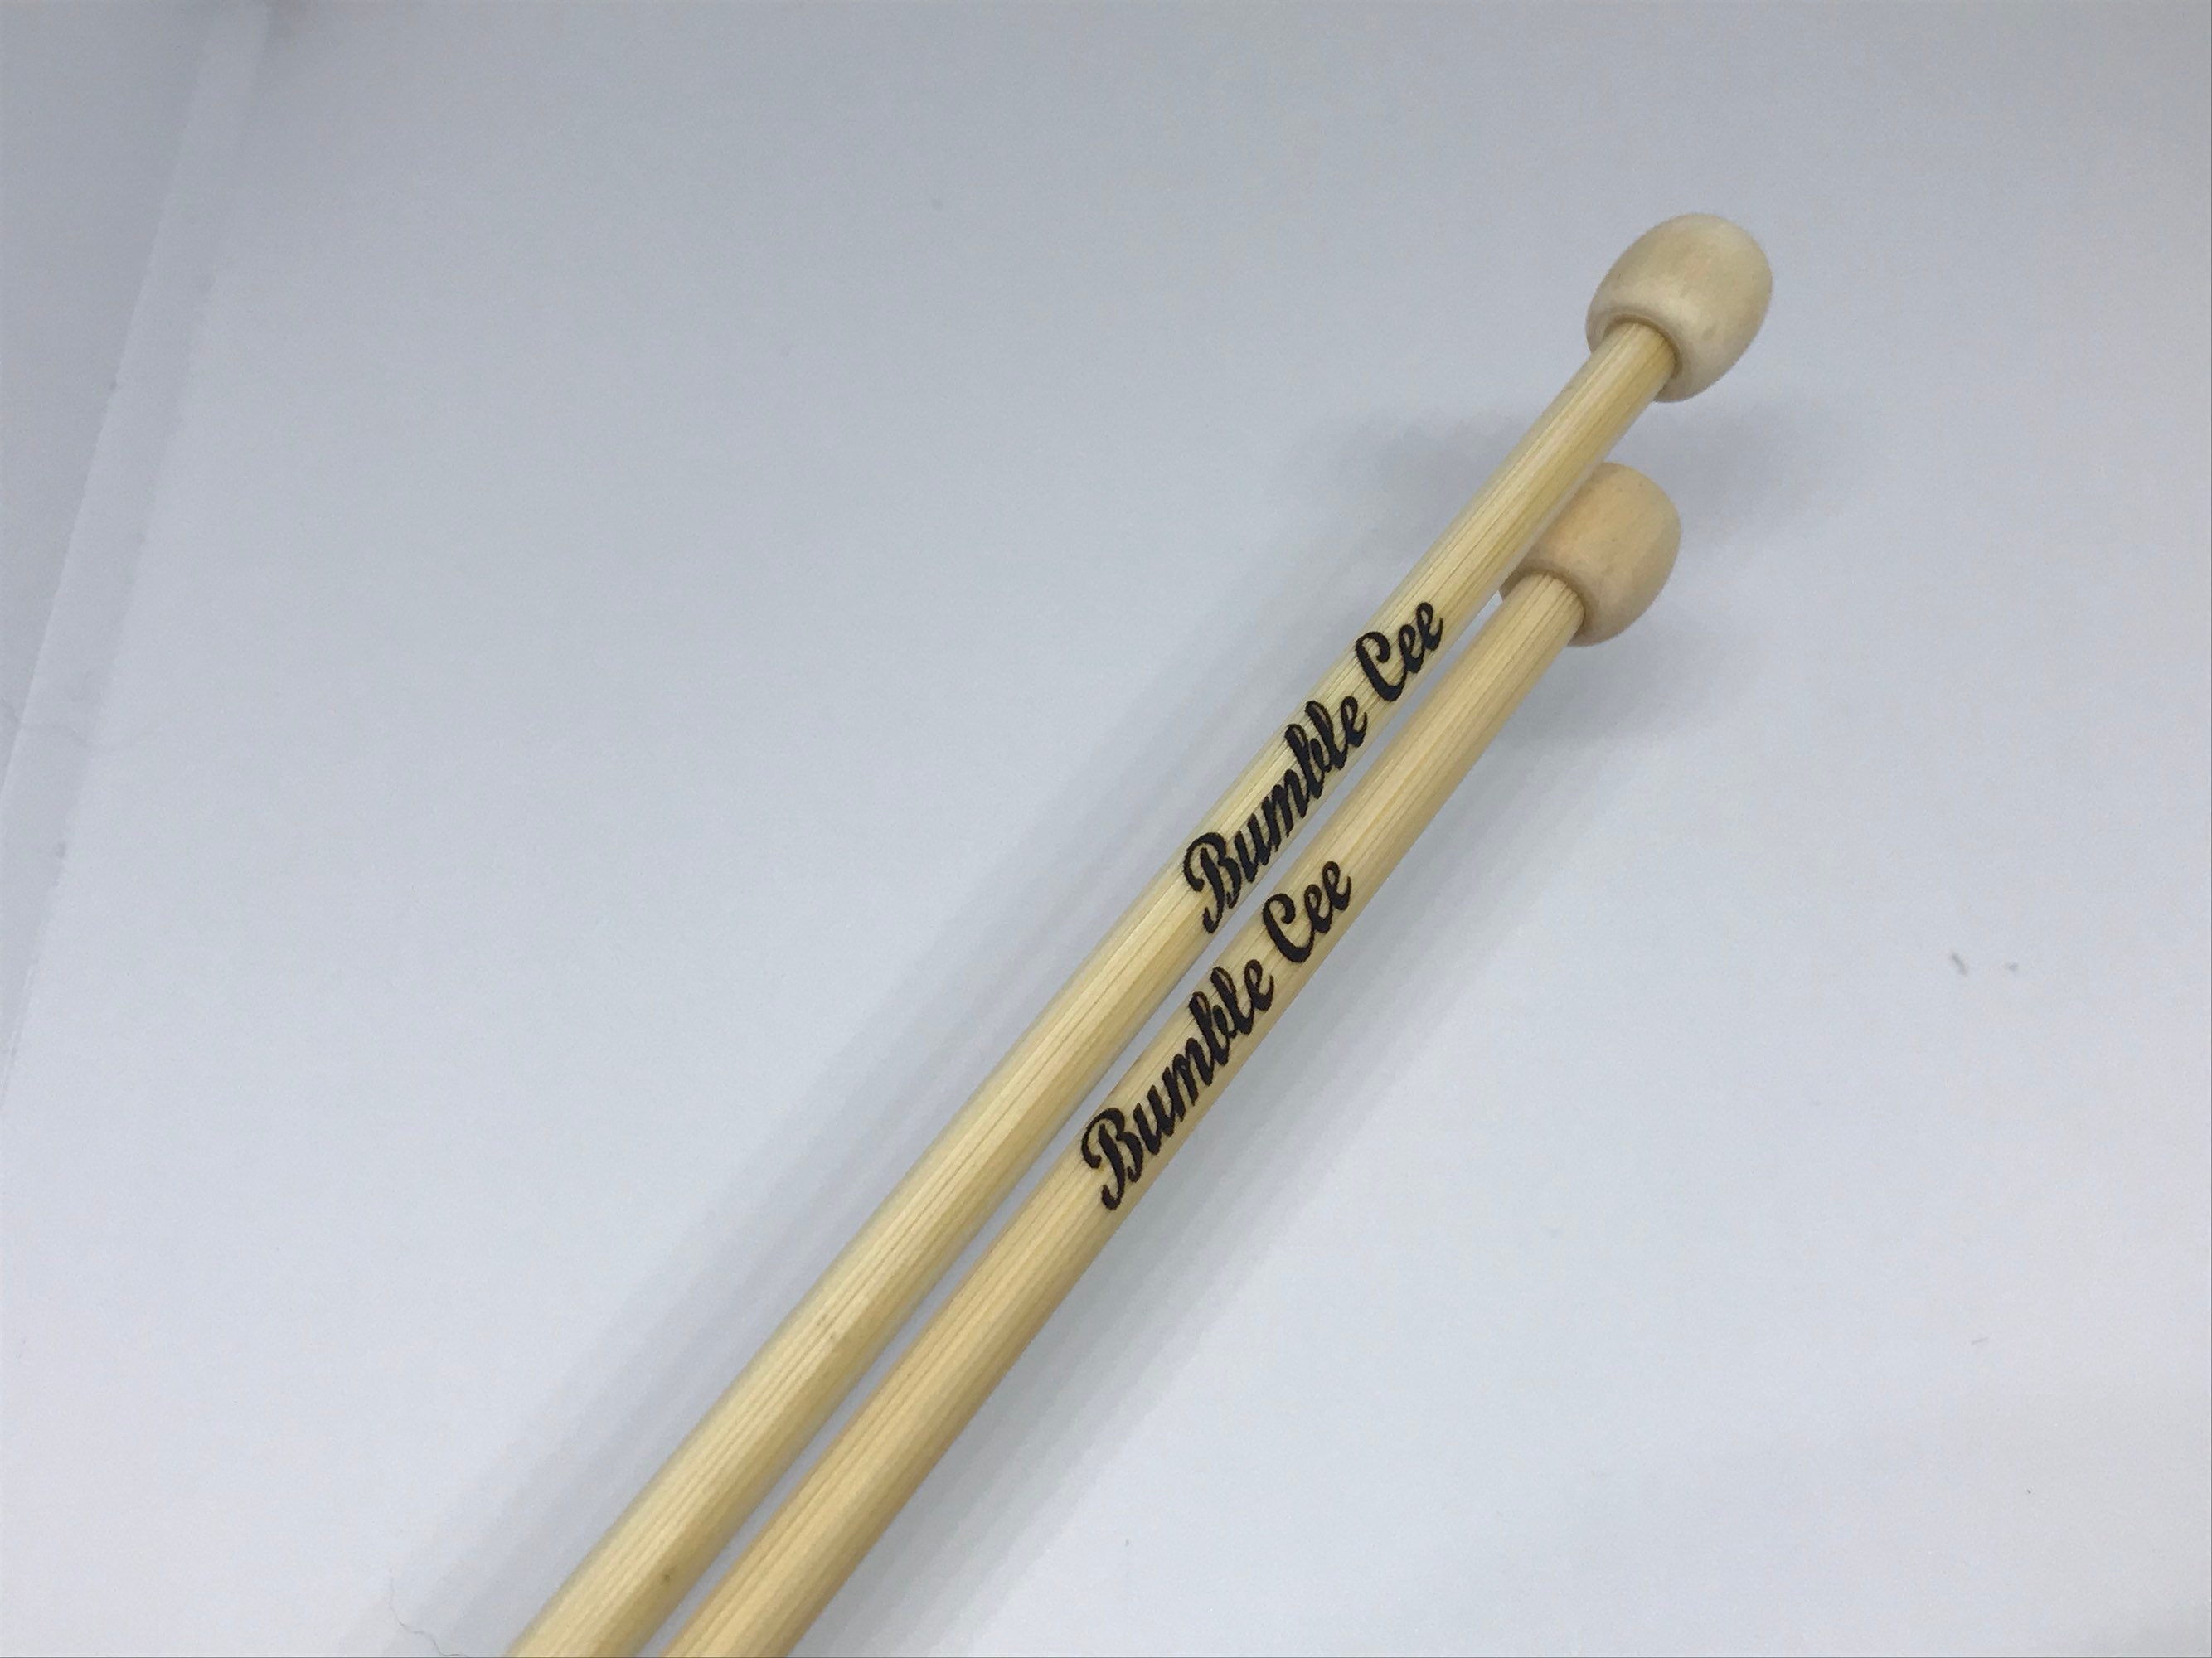 Knitting Needles,knitting,wooden Needles,big Knitting Needles,knitting  Supplies,needles,gift for Grandma,personalized Gift,gift for Her,idea 